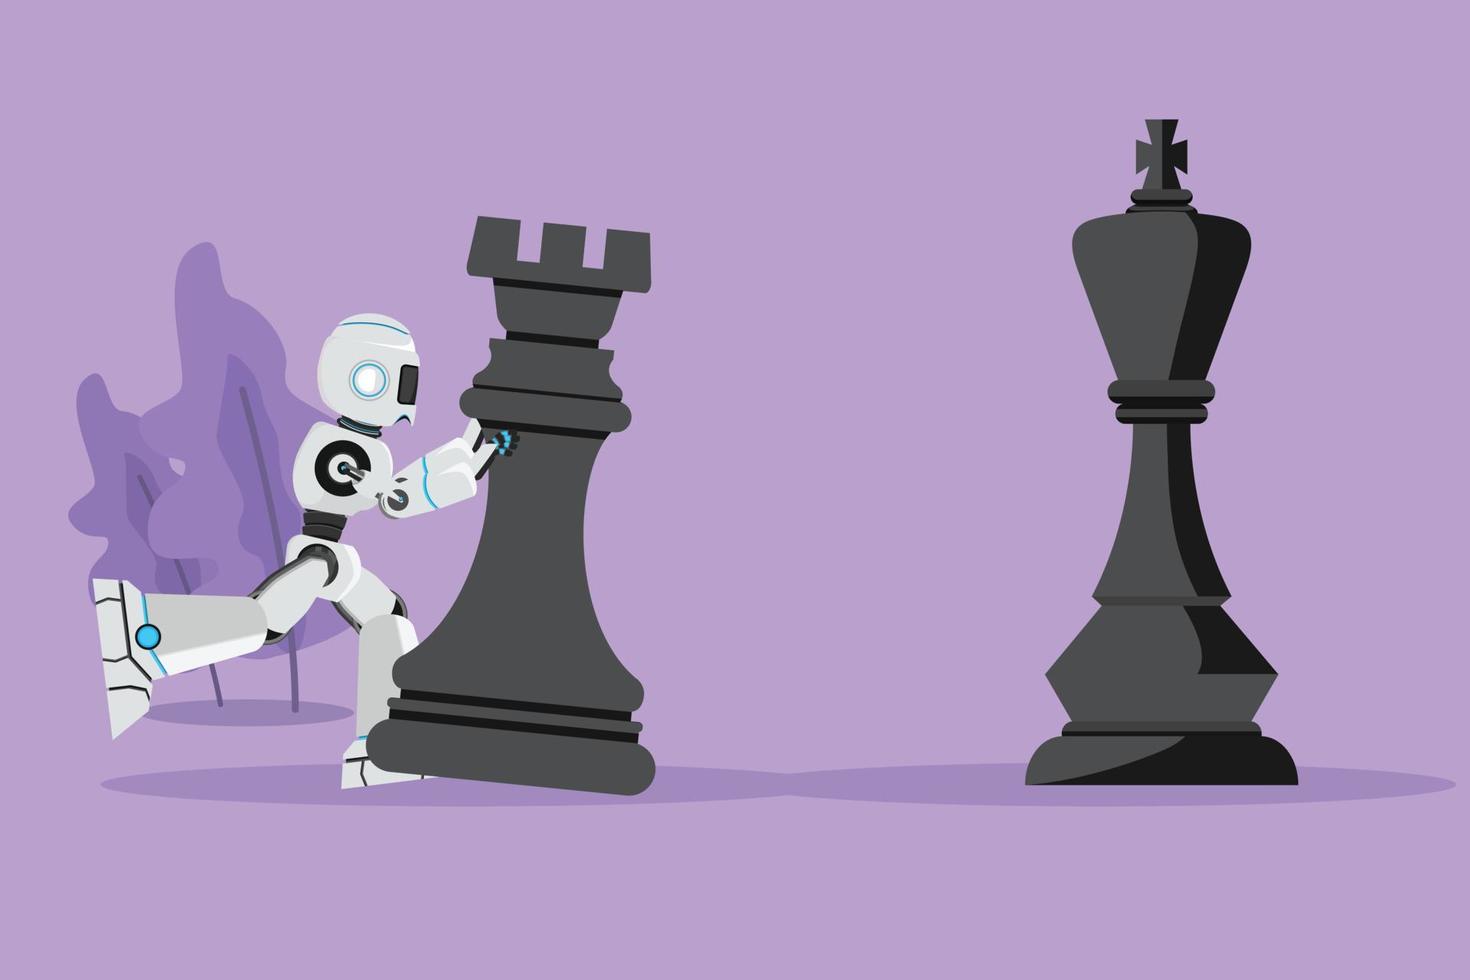 Graphic flat design drawing robot push huge rook chess piece to beat king. Strategic movement in winning game. Future technology development. Artificial intelligence. Cartoon style vector illustration